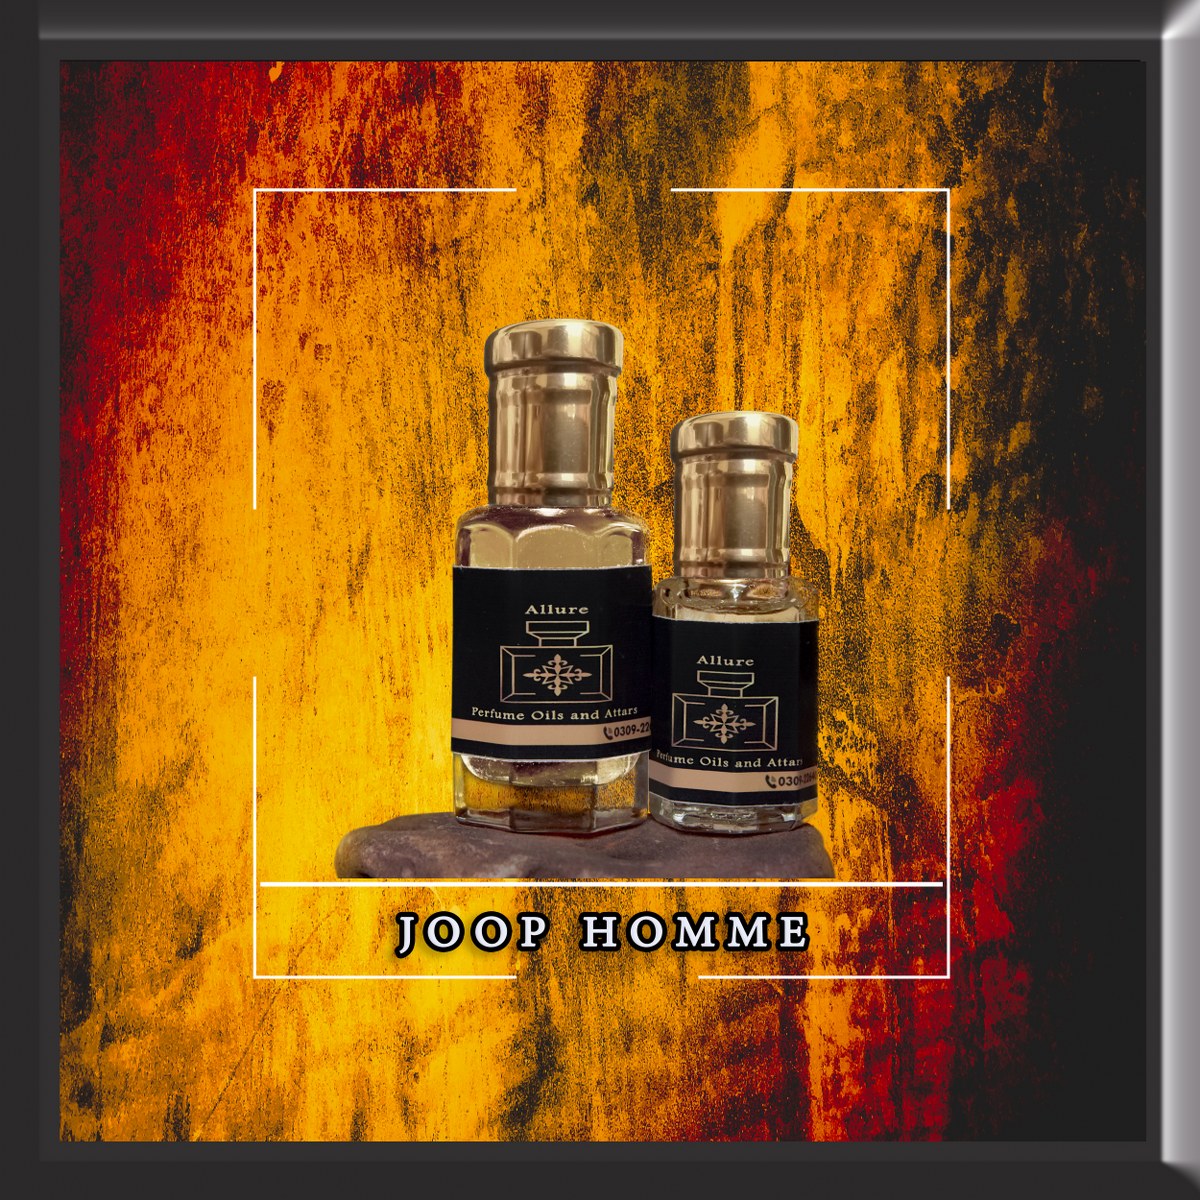 Joop Homme Attar in high quality